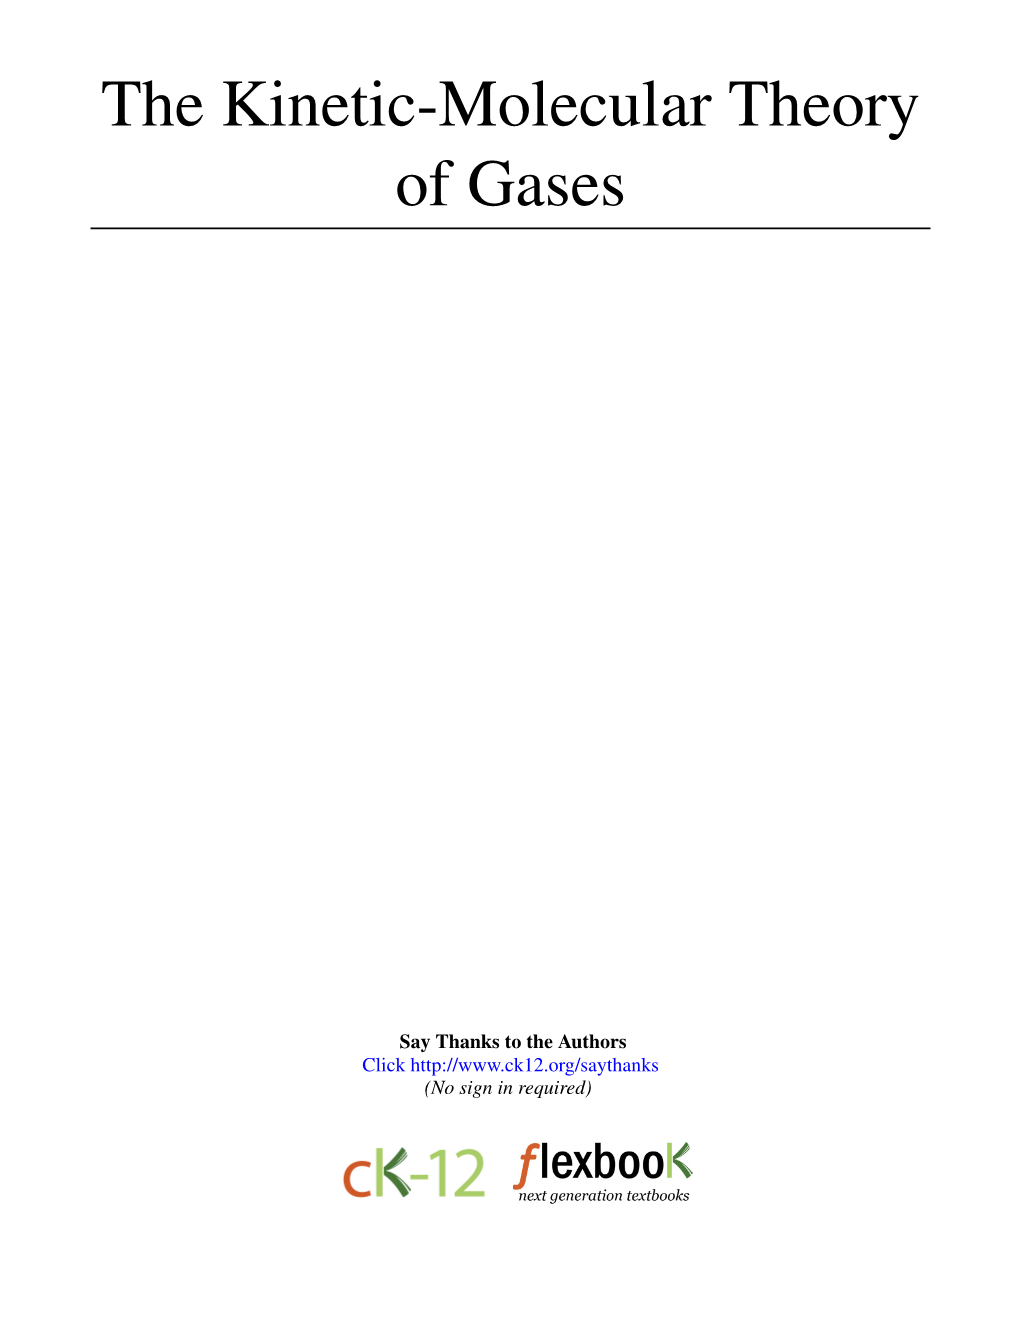 The Kinetic-Molecular Theory of Gases